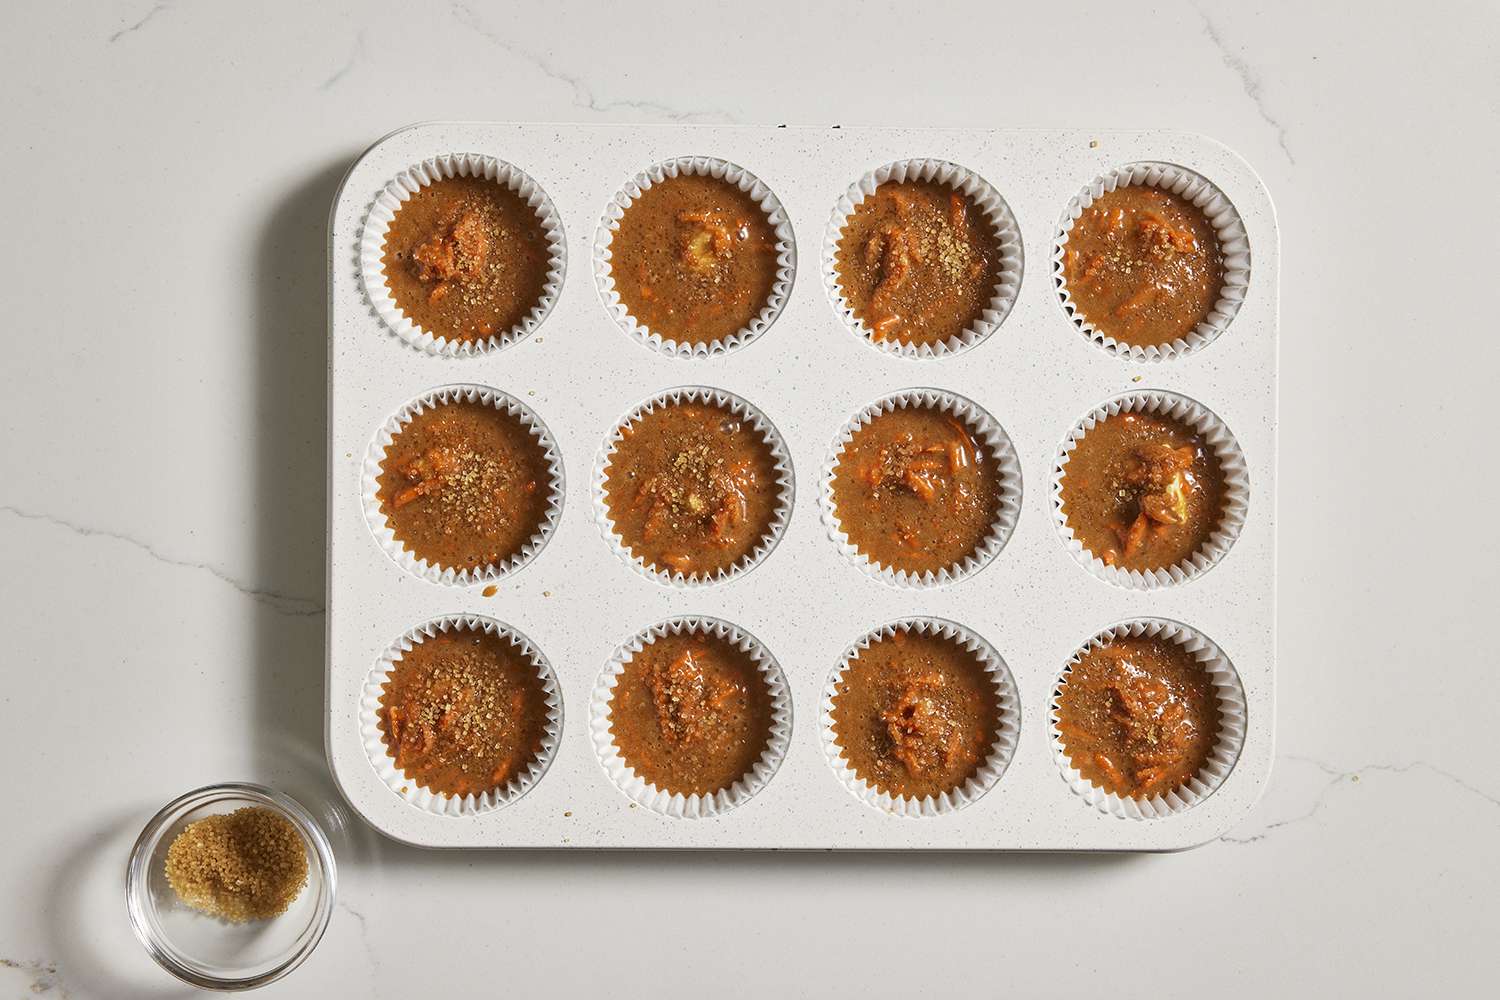 Muffin cups filled with more batter